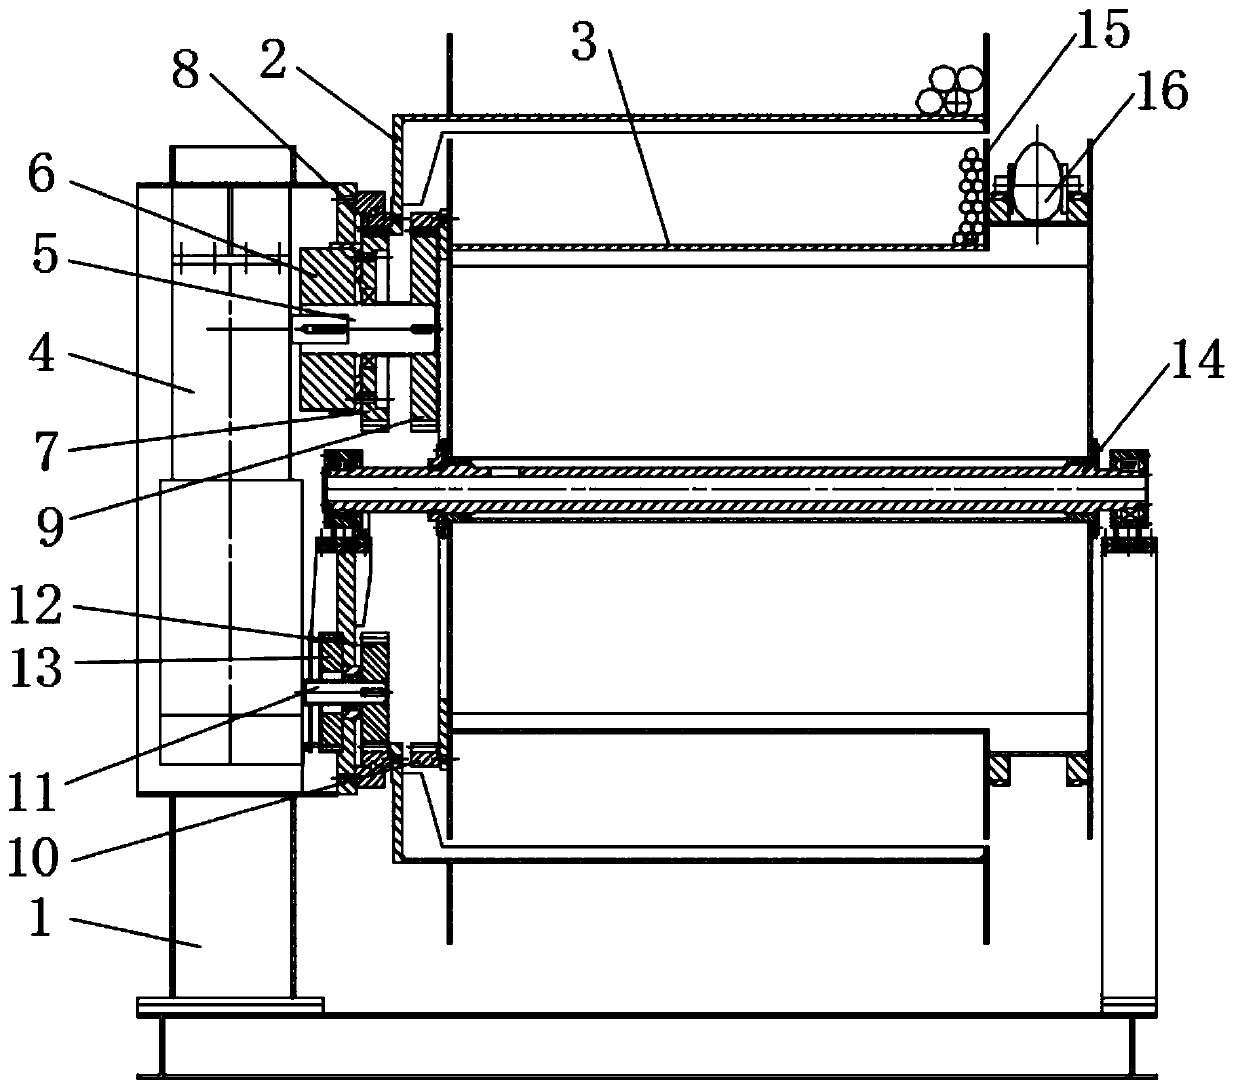 Double-layer roller winch for multi-cable-diameter dragging arrayed cables